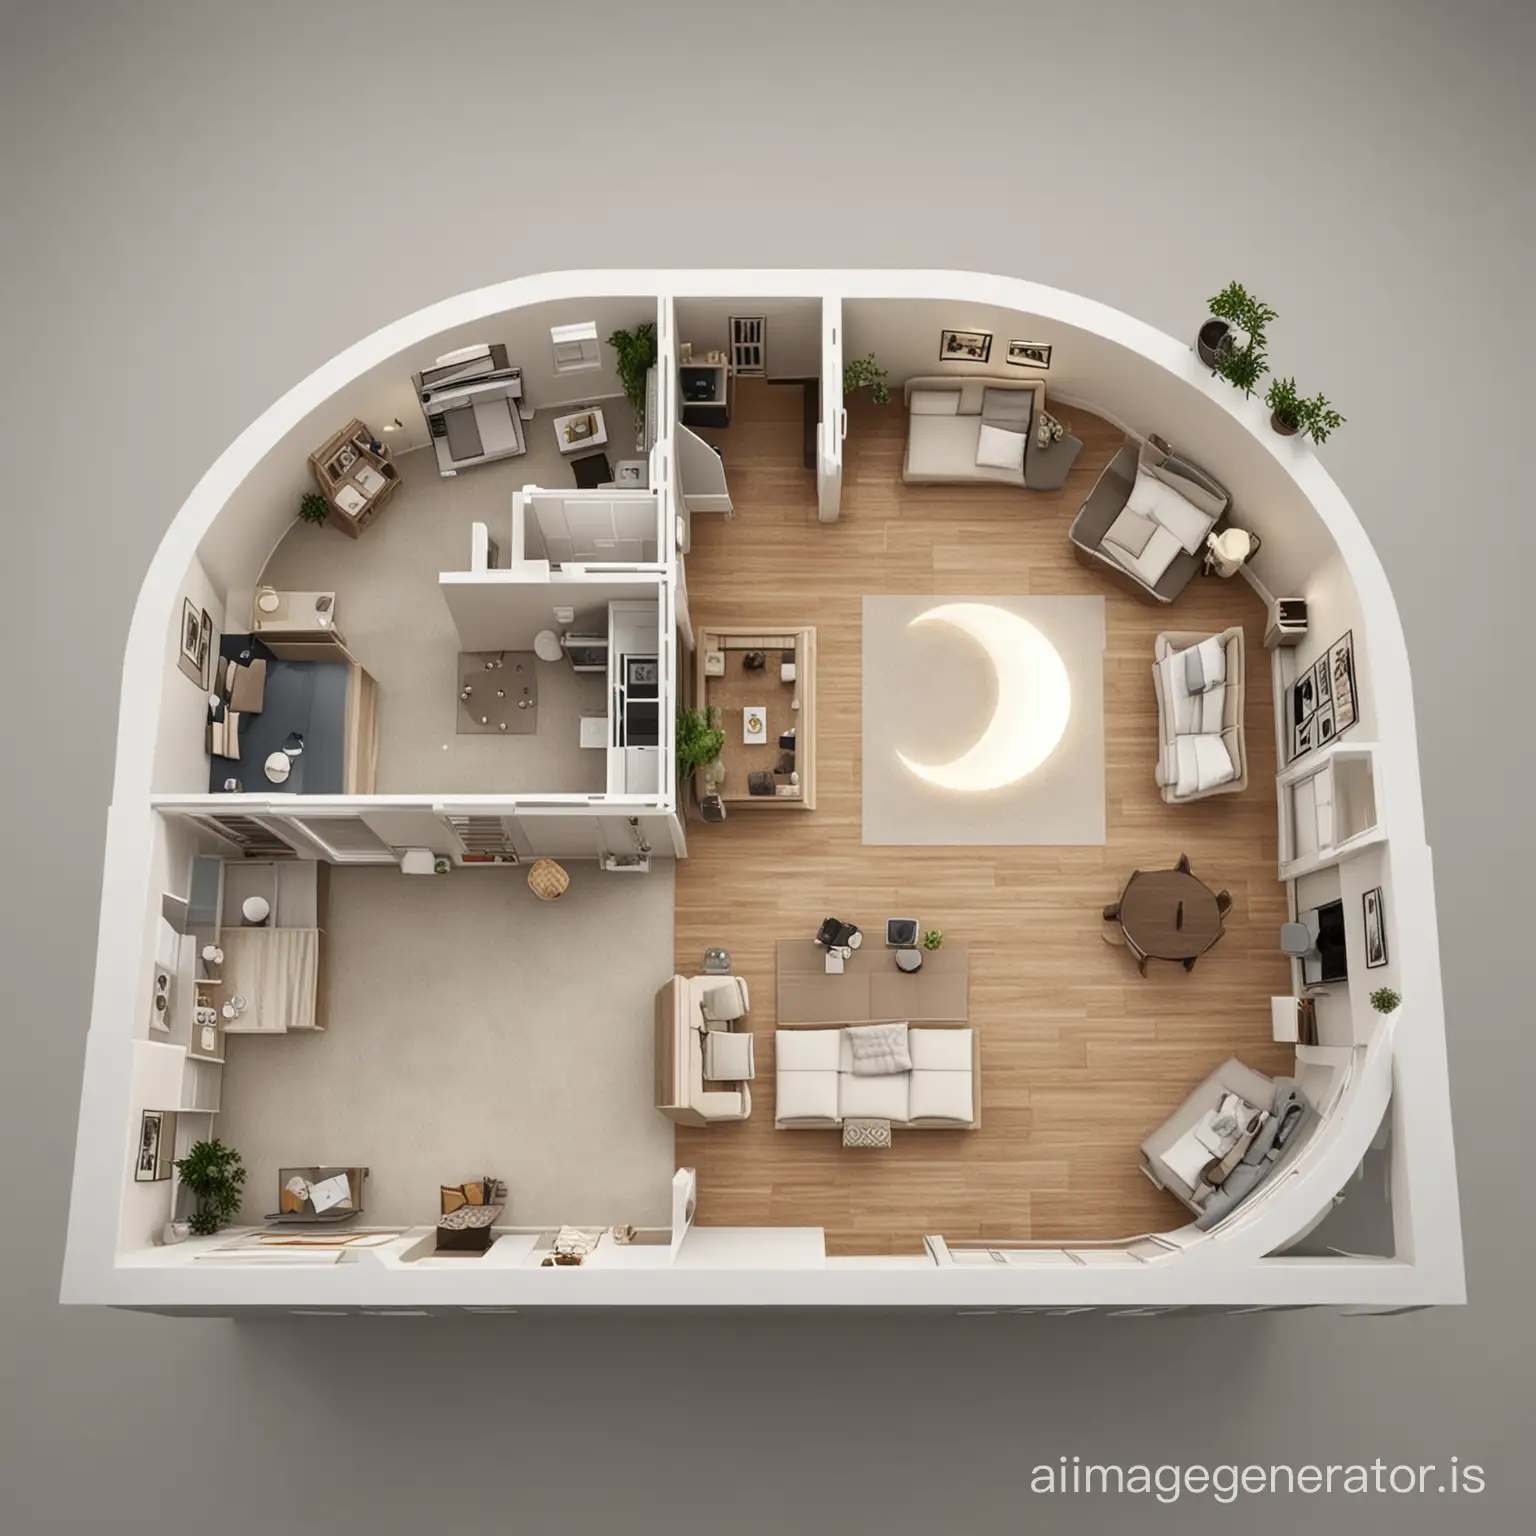 3D floor plan design for an apartment with a moon crescent shape